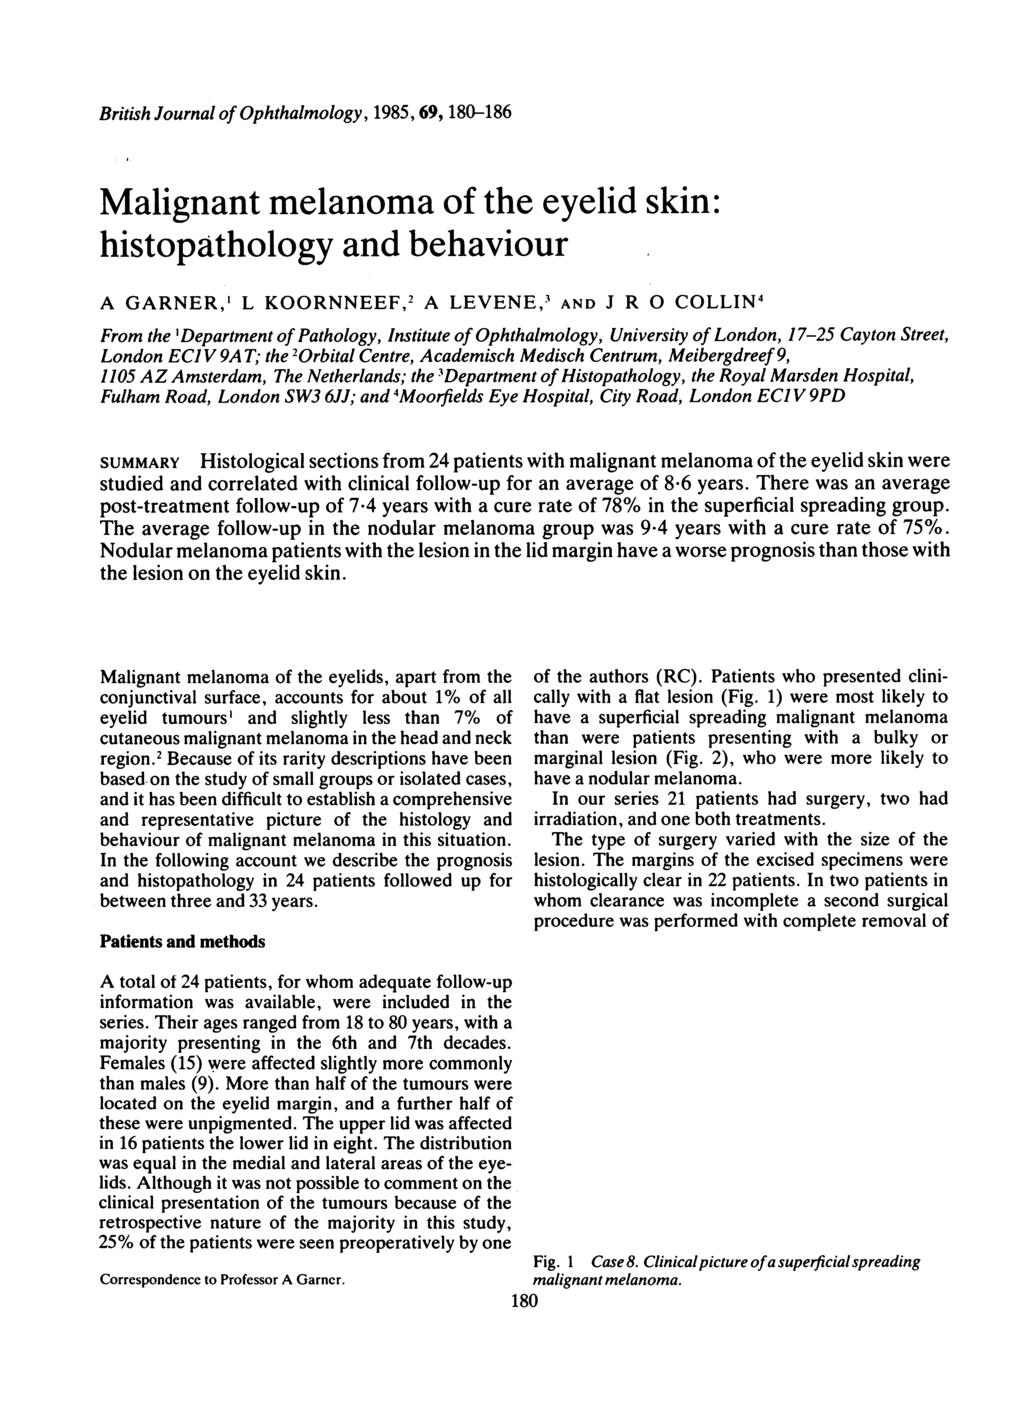 British Journal of Ophthalmology, 1985, 69, 180-186 Malignant melanoma of the eyelid skin: histopathology and behaviour A GARNER,' L KOORNNEEF,2 A LEVENE,3 AND J R 0 COLLIN4 From the 'Department of